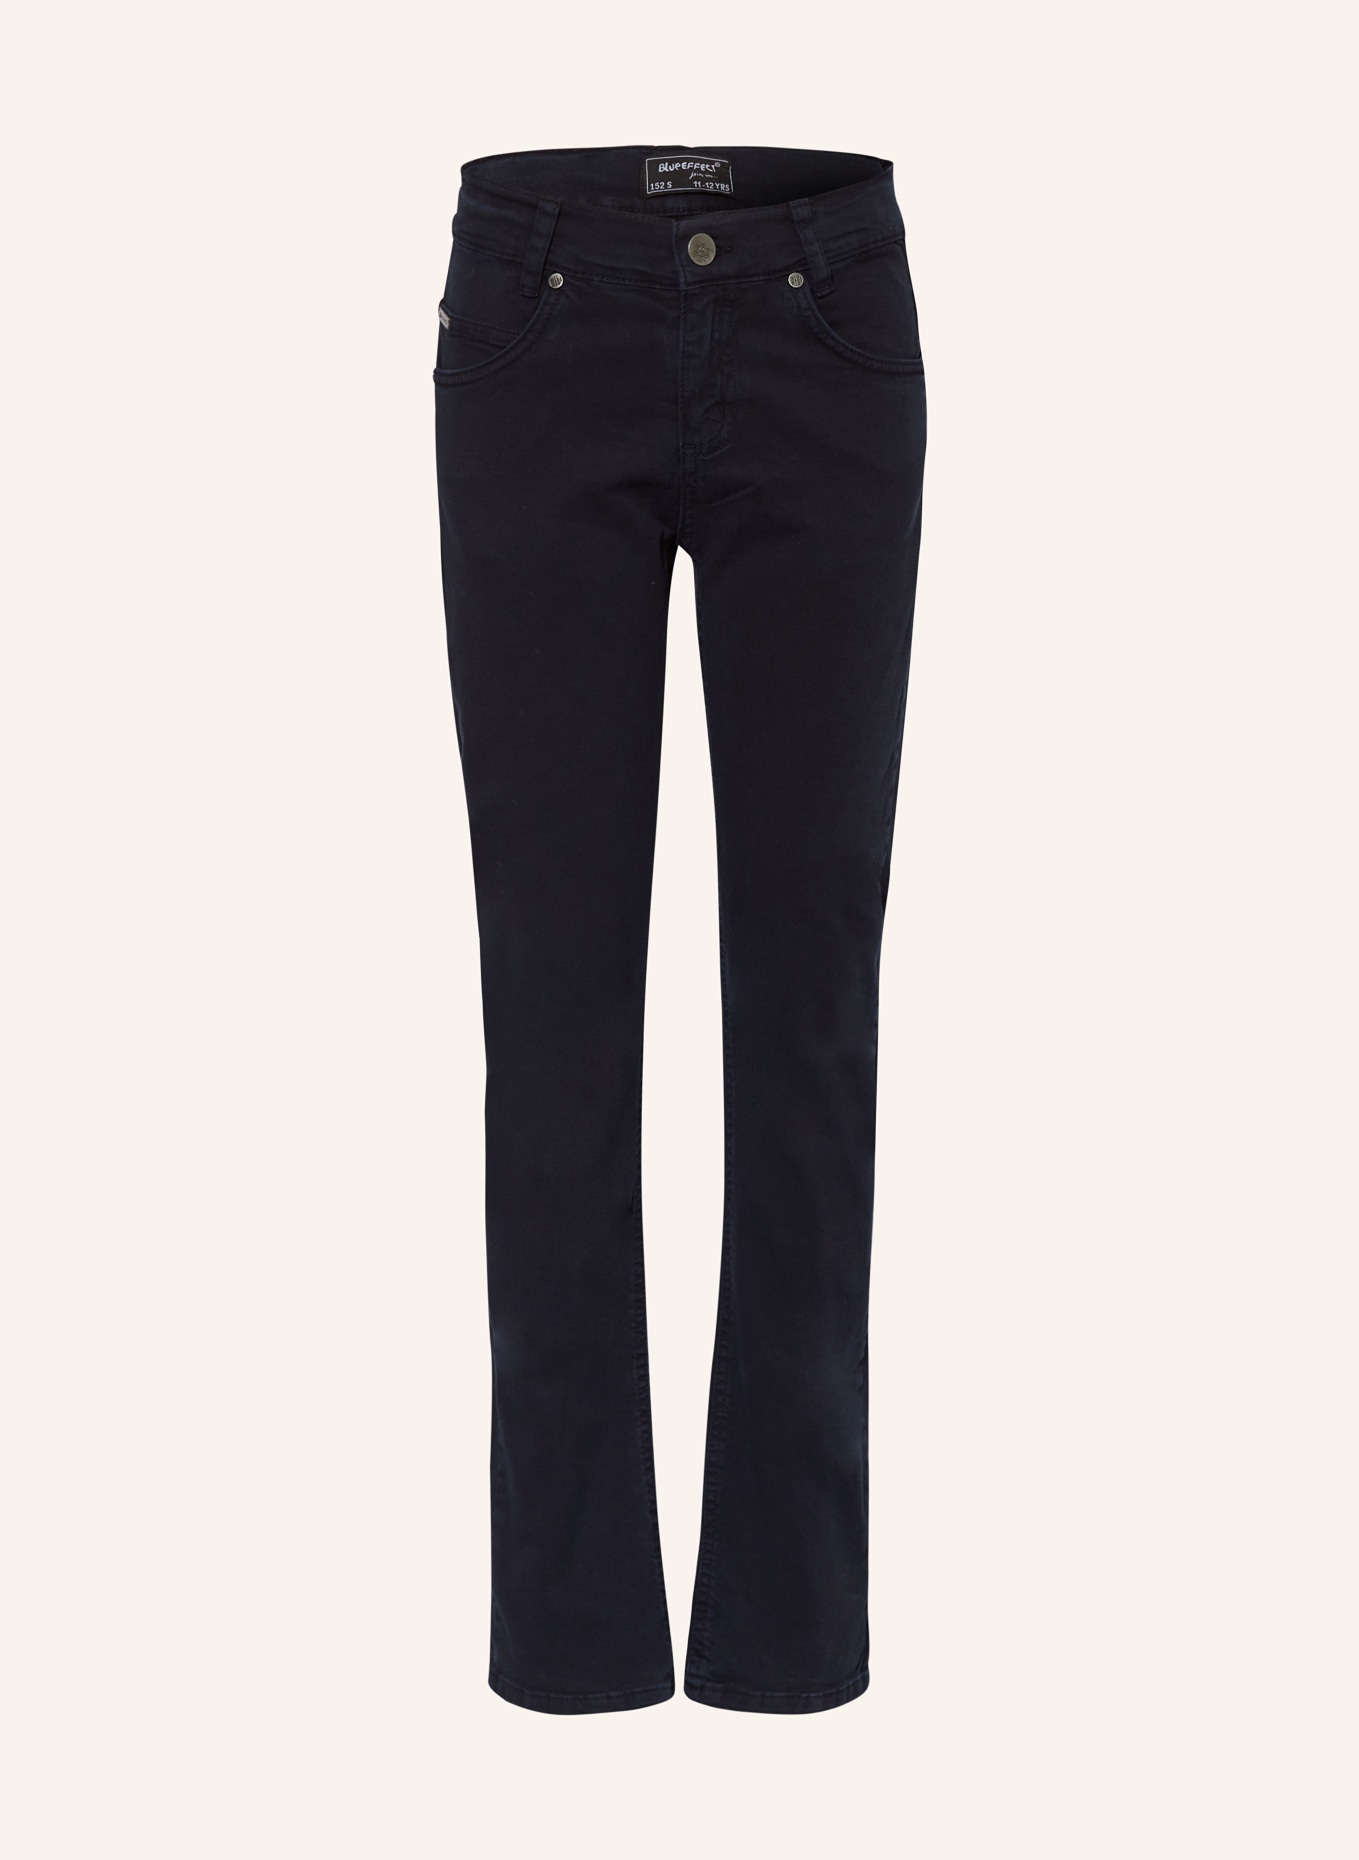 BLUE EFFECT Jeans Relaxed Fit, Farbe: DUNKELBLAU (Bild 1)